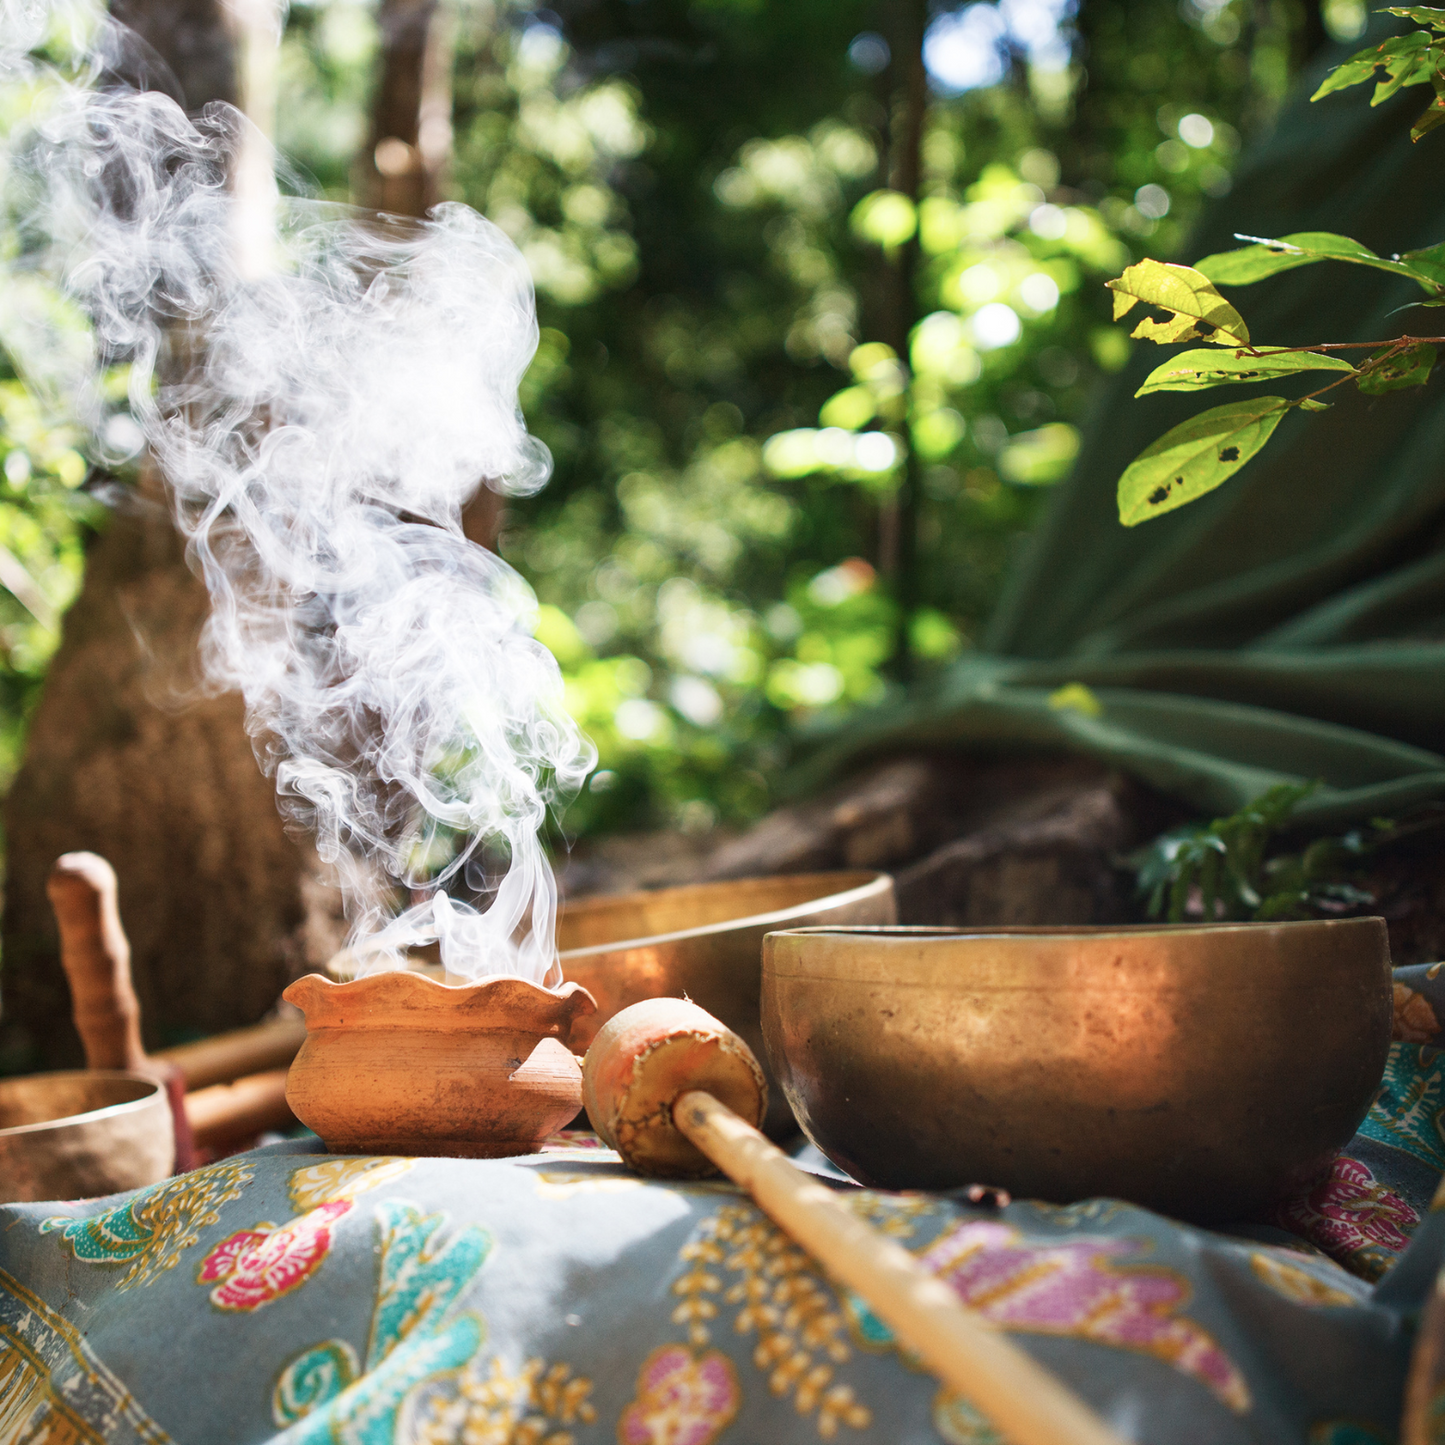 Witchy Pooh's Mugwort Herb For Ceremonial Practice Smudging Vivid Meditation to Connect with the Ancestors